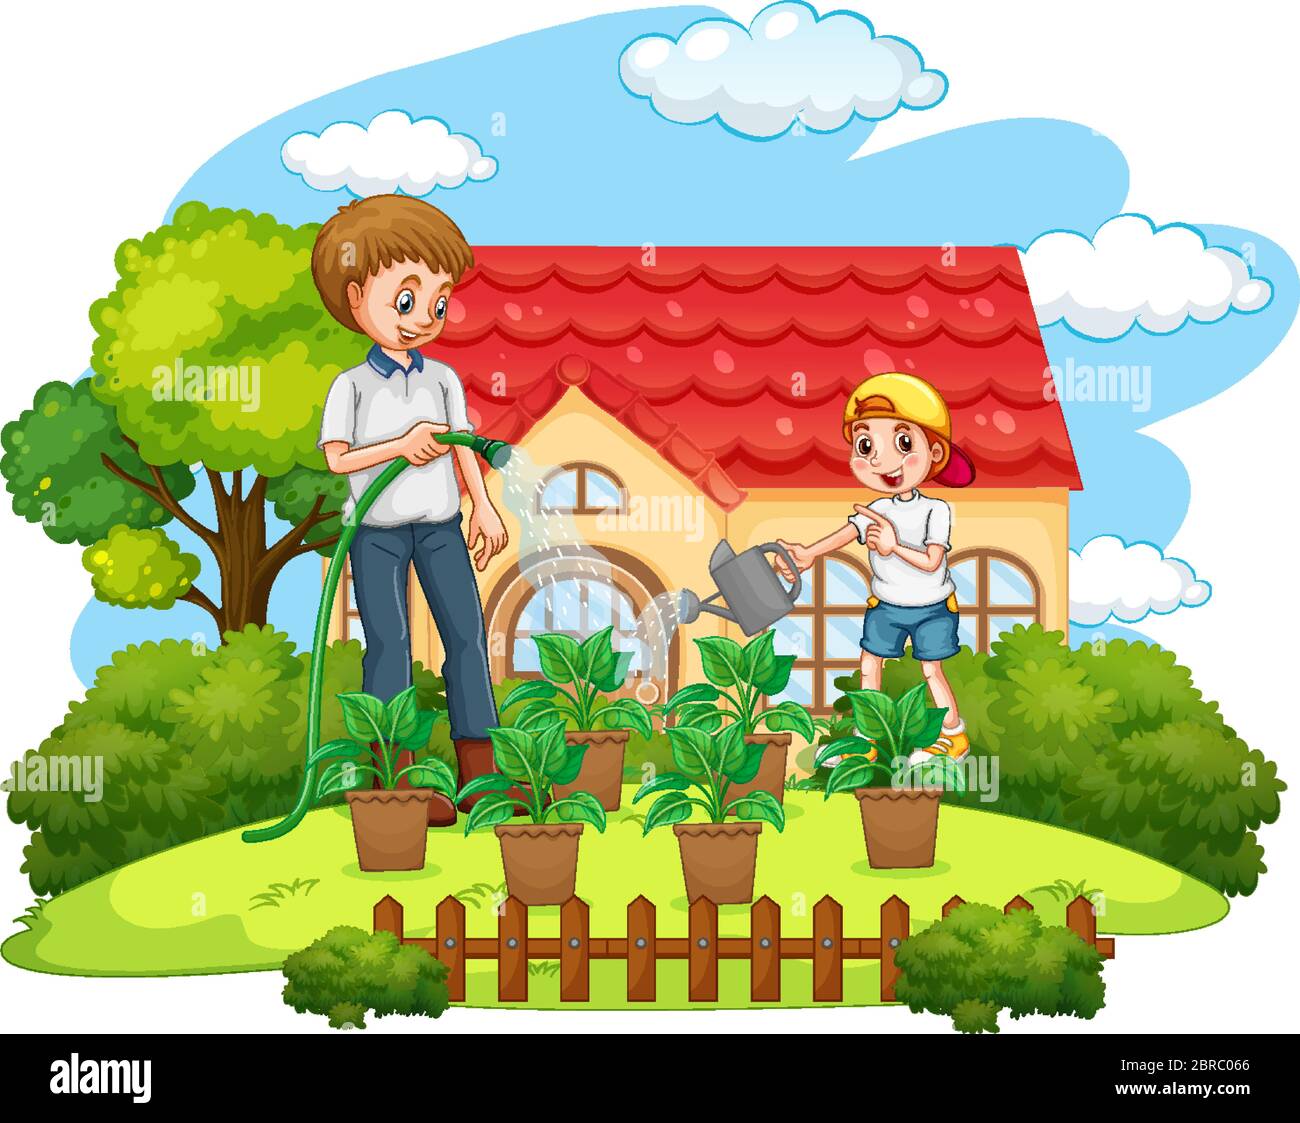 Scene with family having a good time at home illustration Stock Vector